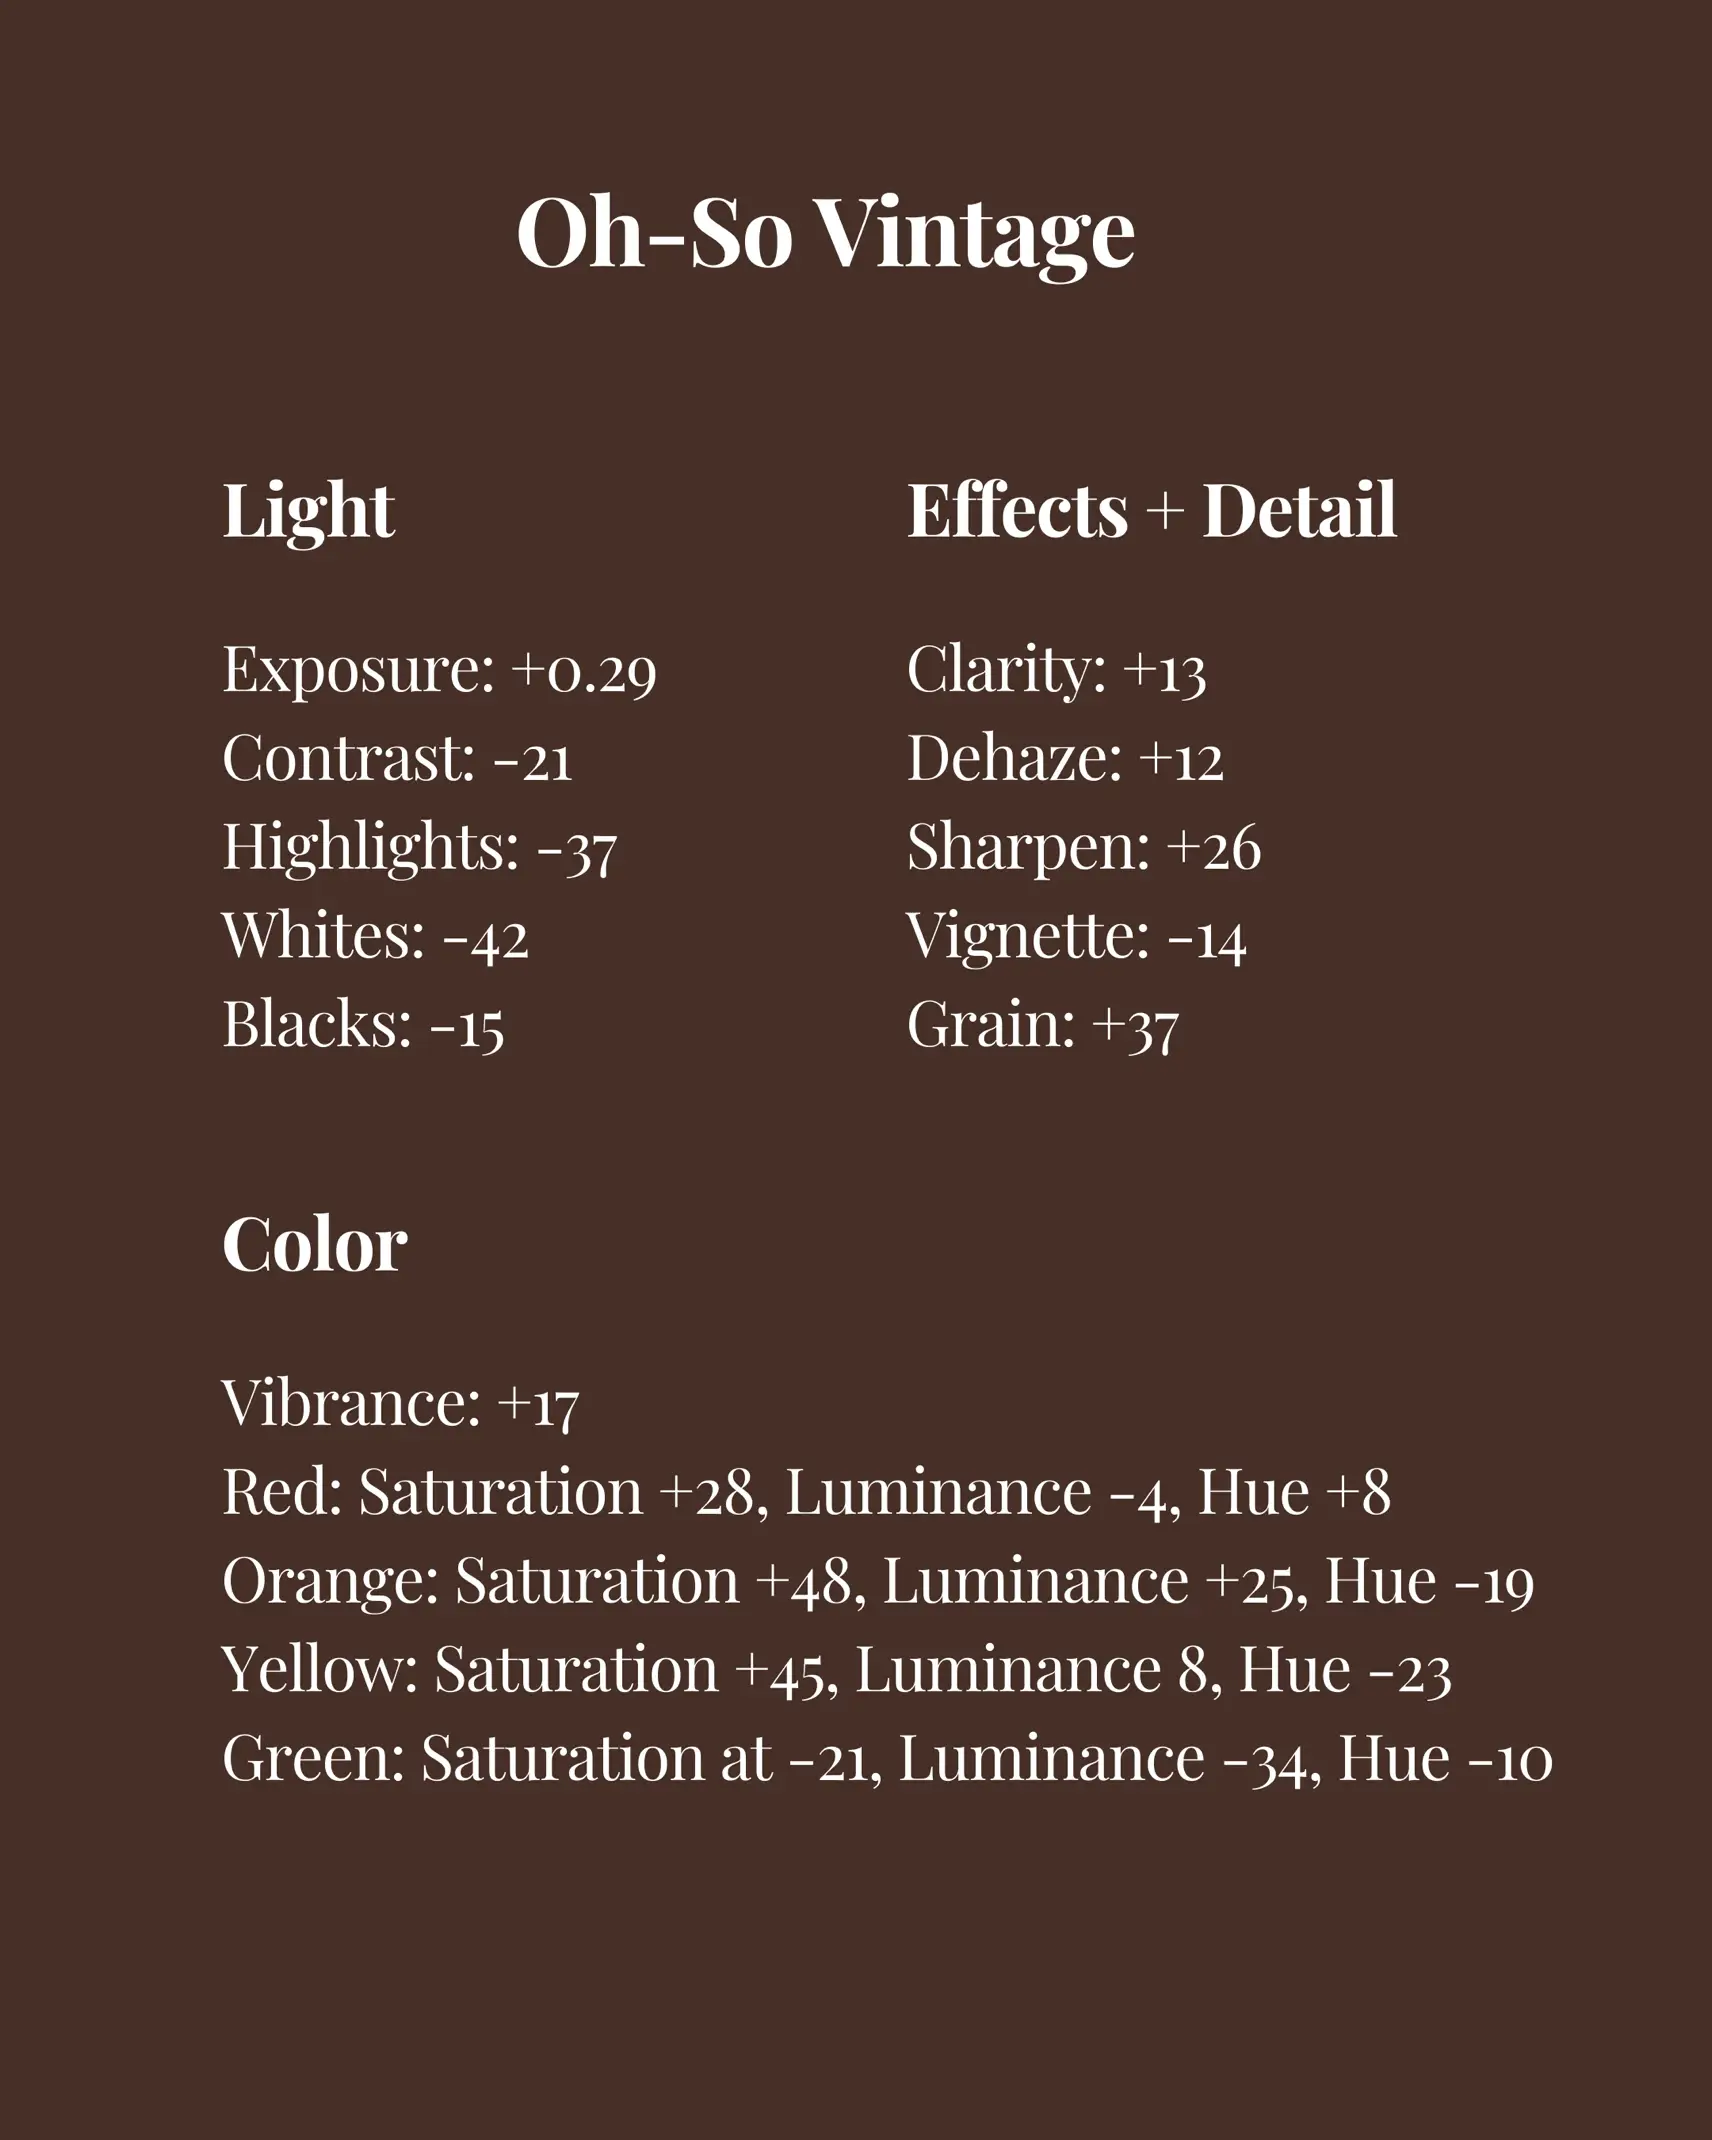  A list of effects for a vintage image.